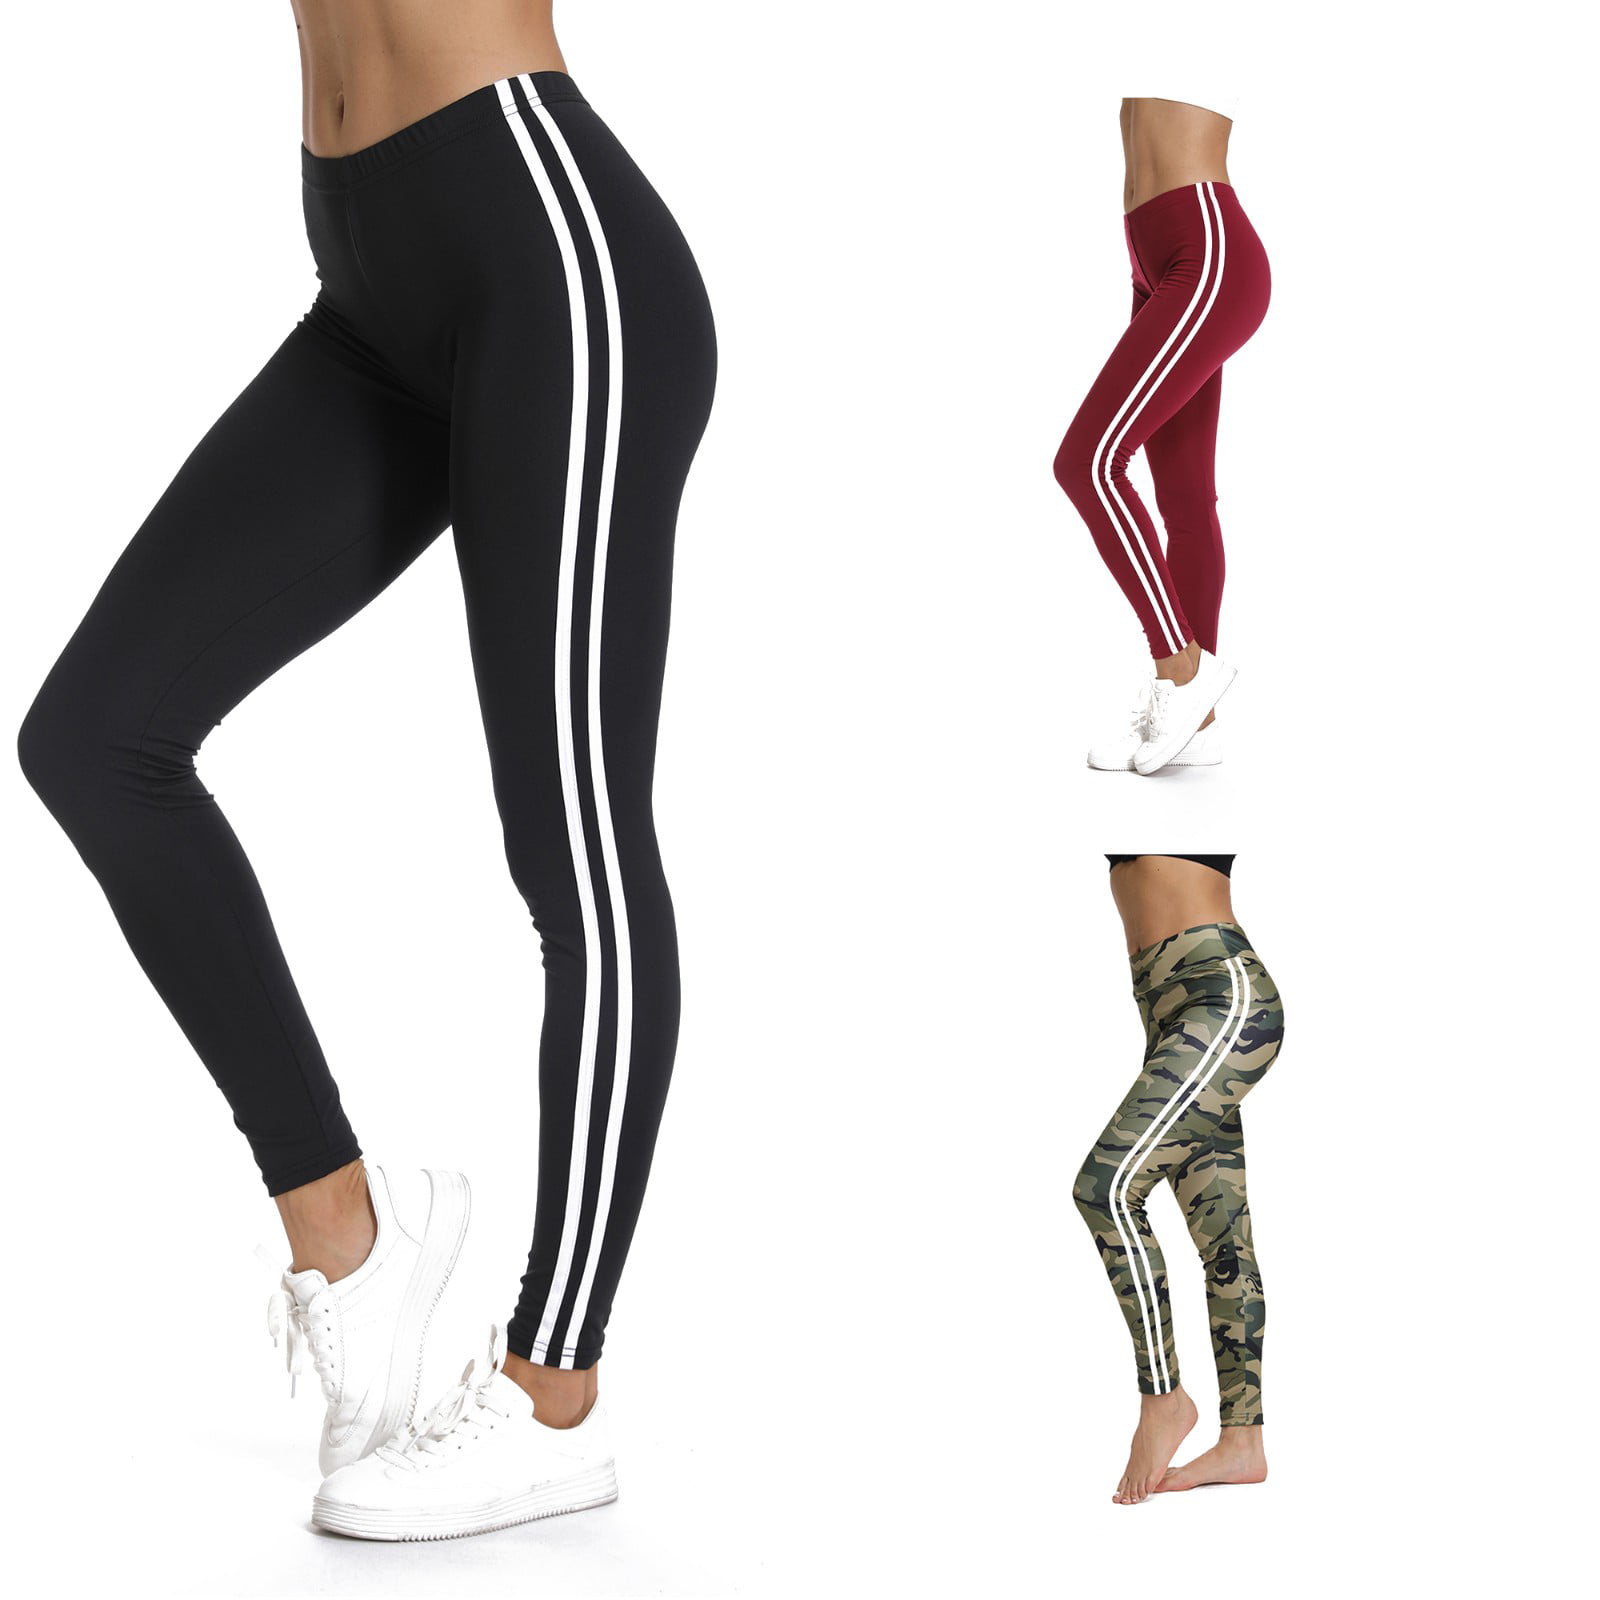 6 Day Denim workout leggings for push your ABS